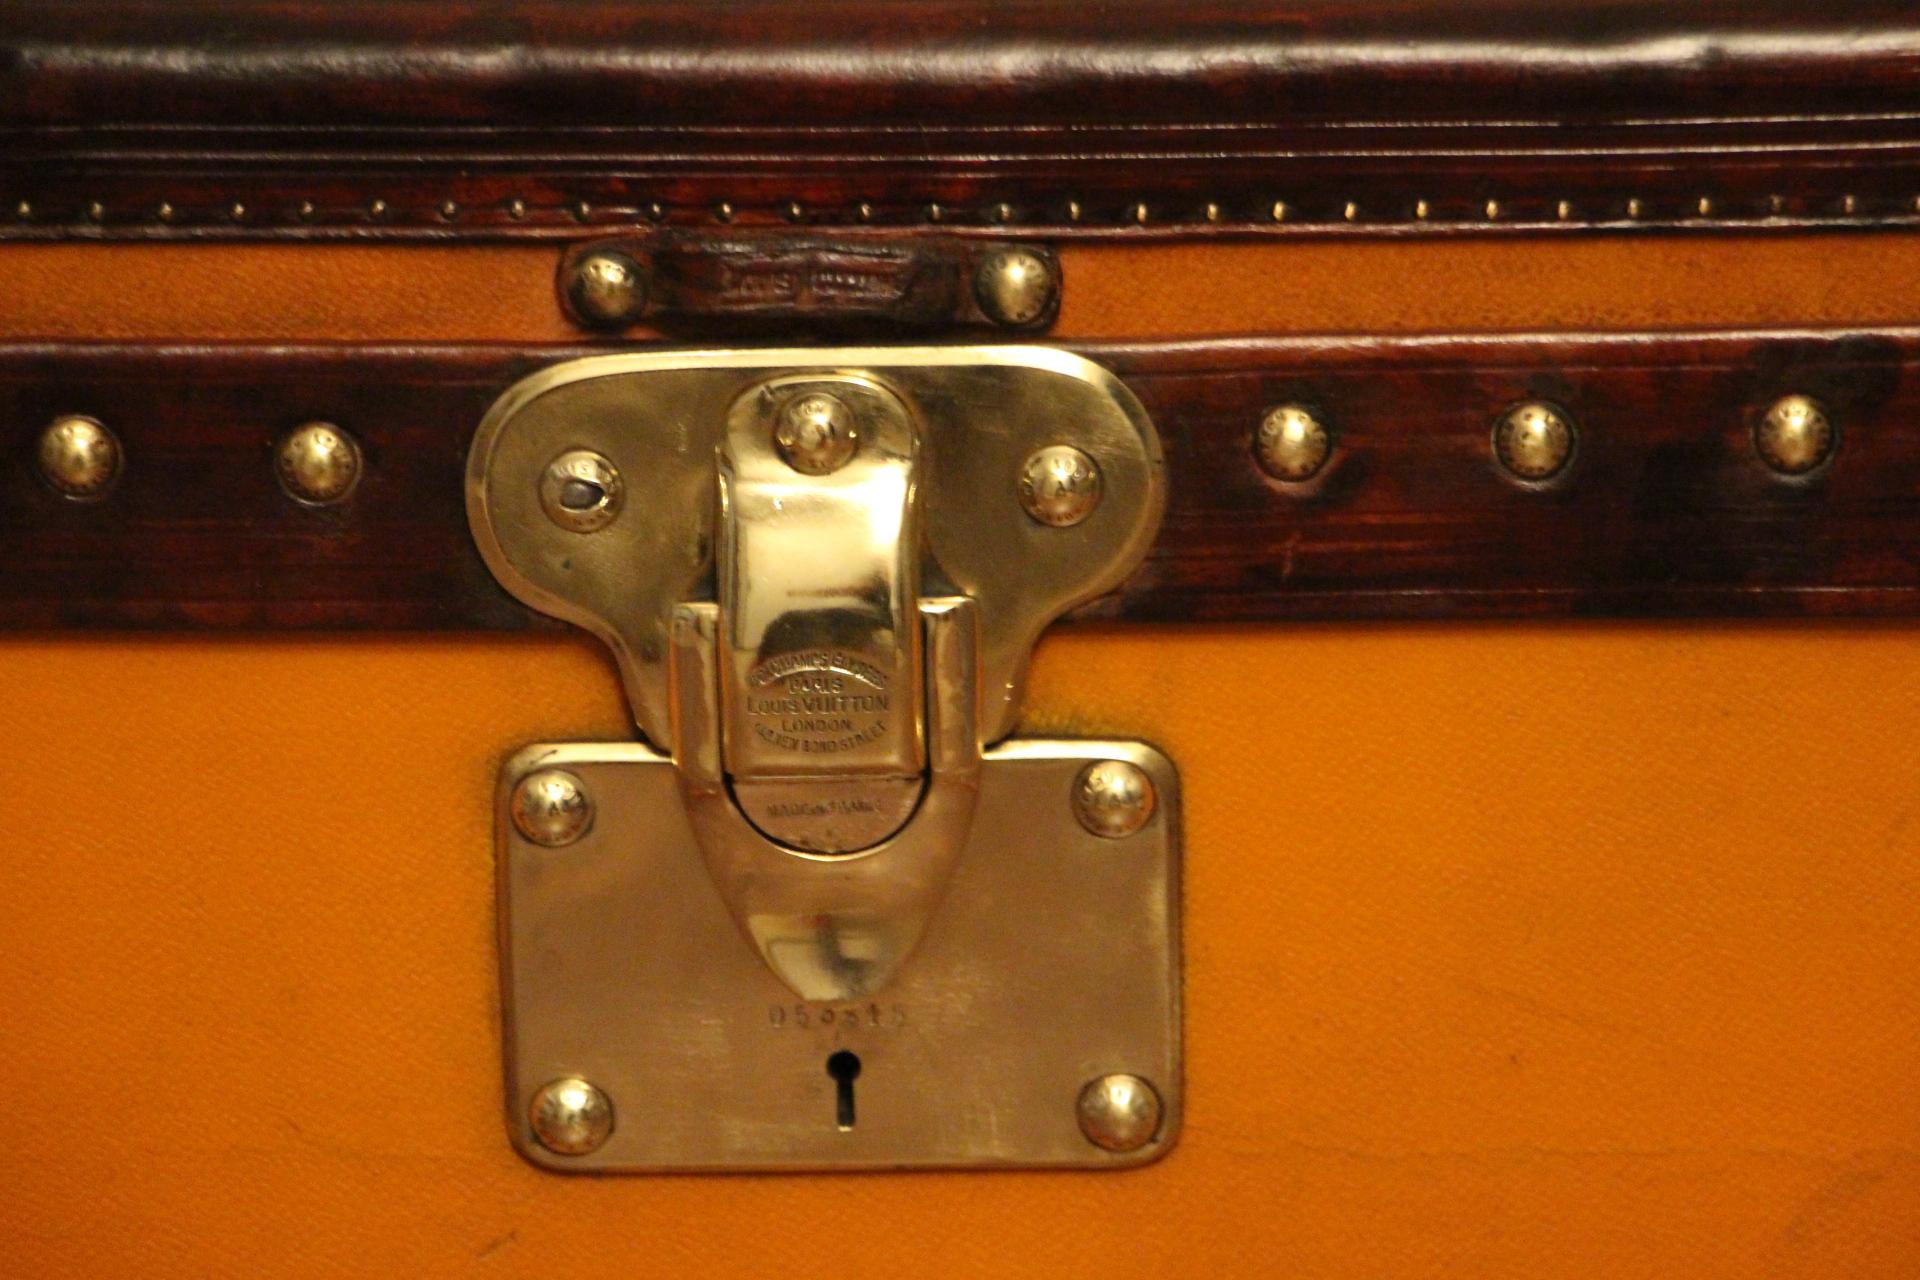 Very nice orange canvas Louis Vuitton steamer trunk, featuring Louis Vuitton stamped brass lock, clasps as well as all its studs. Beautiful and rich honey color leather trim and handles. Unusual and elegant proportions.
It is typically from